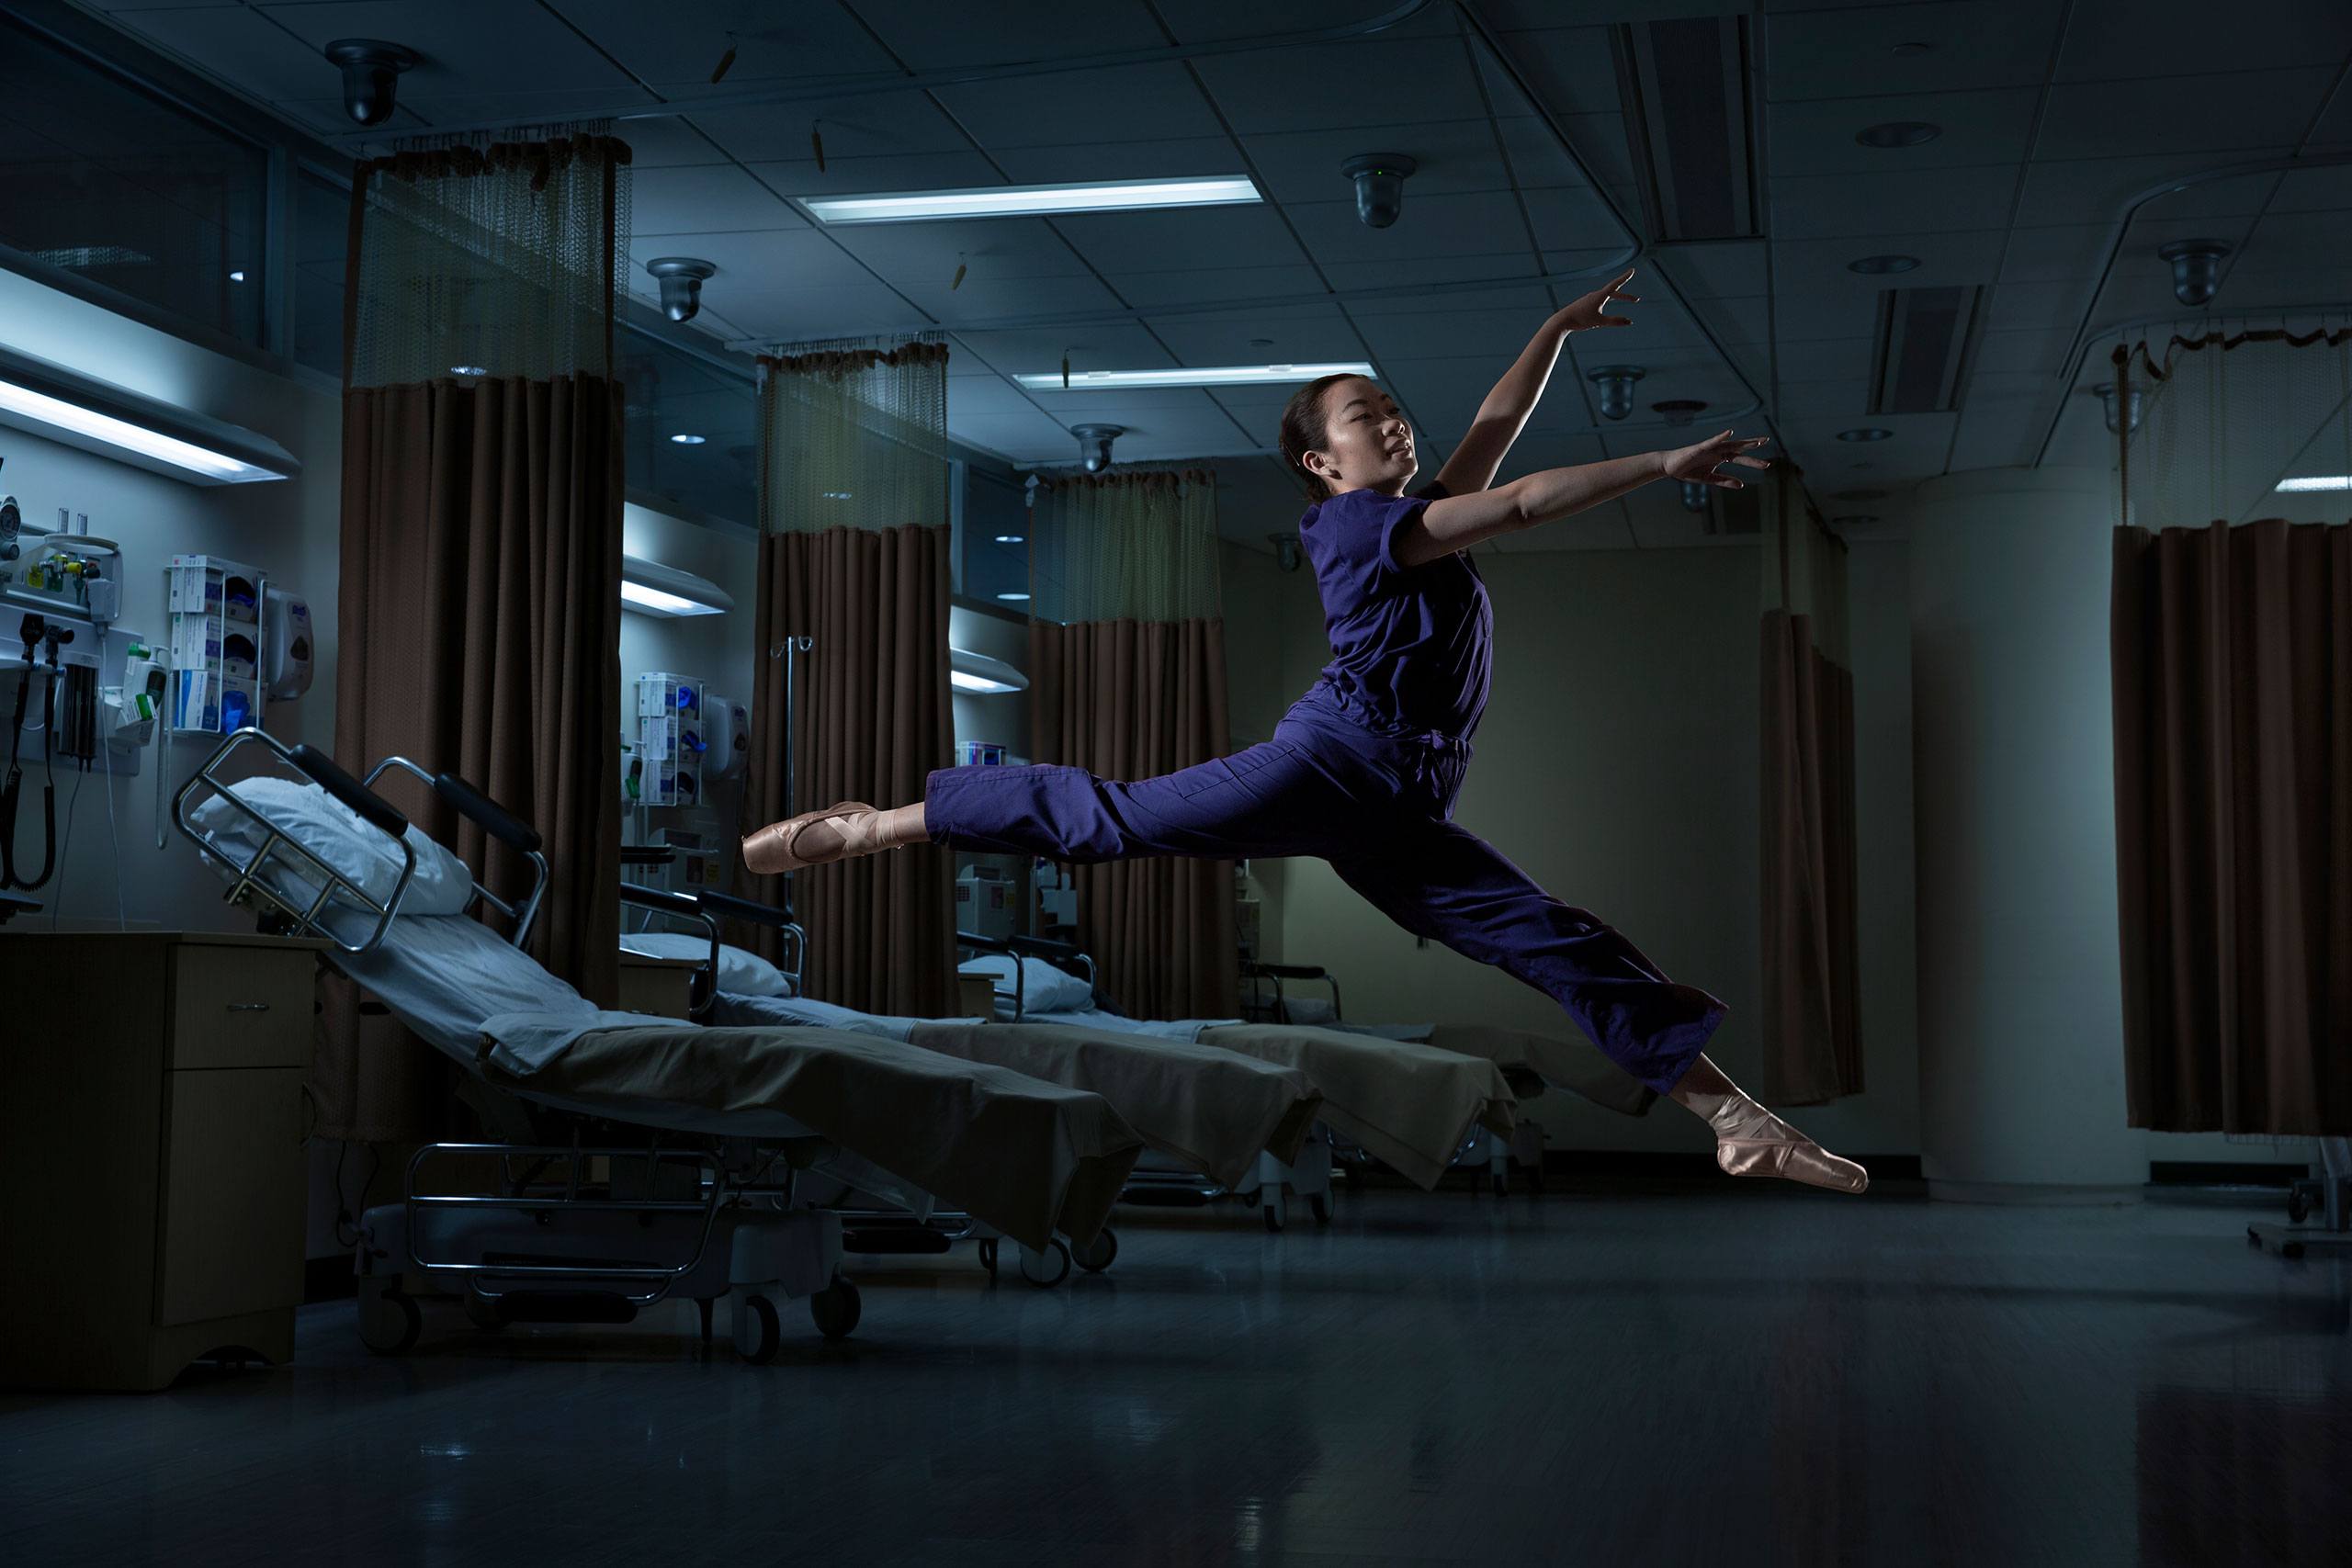 Rory Meyers nursing student Brittany Taam leaping in the air in a hospital room.